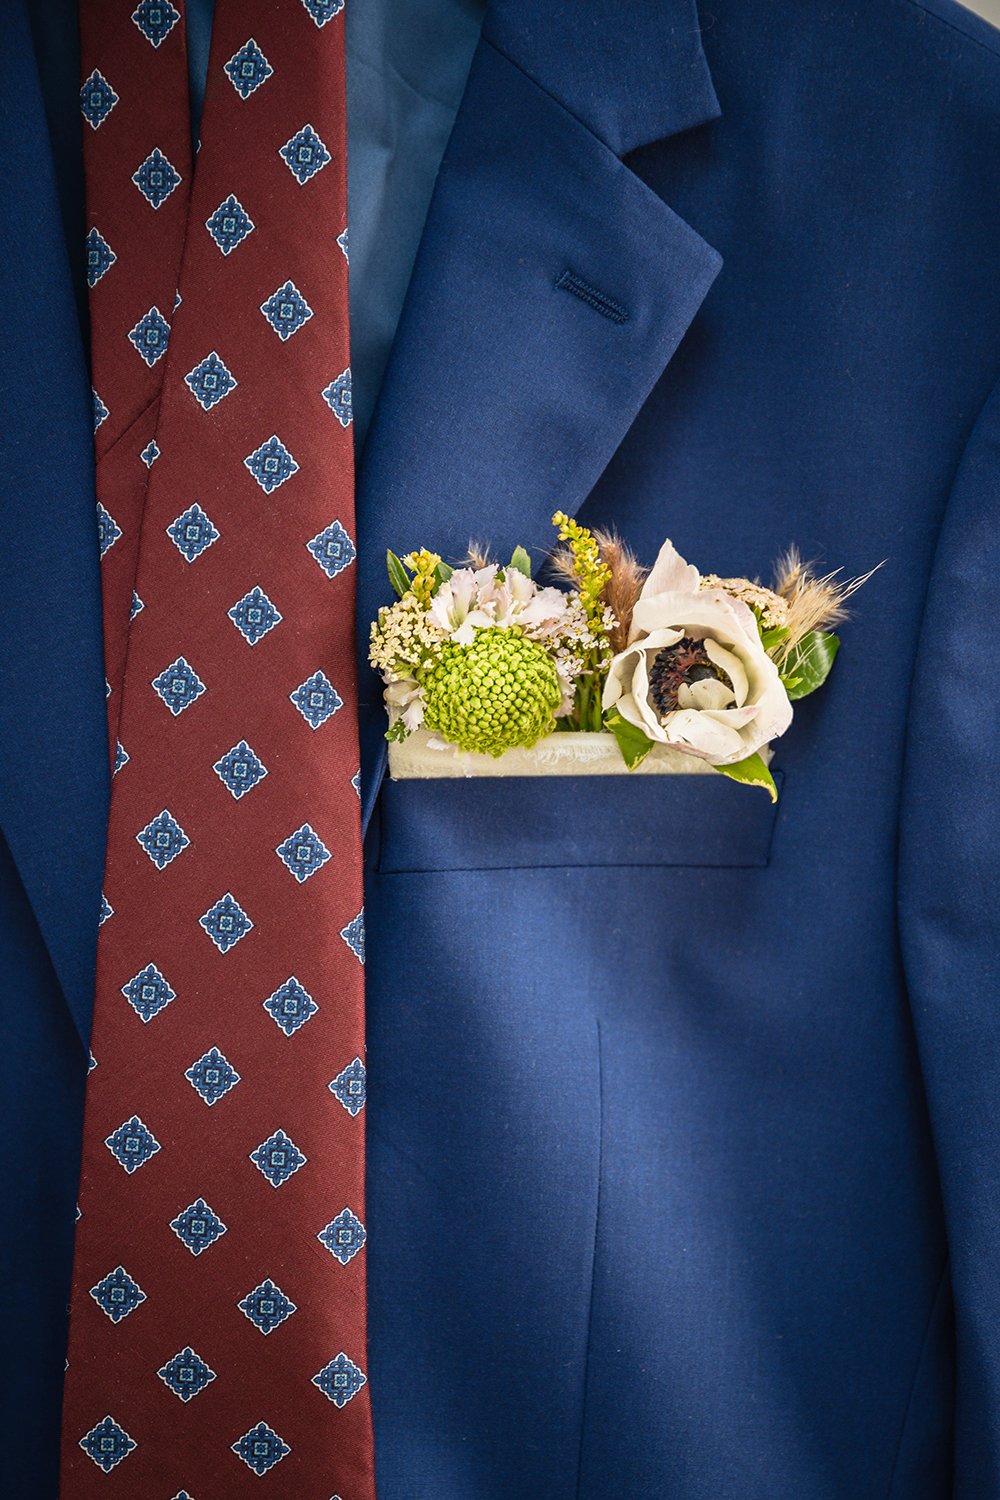 A close up detail shot of a groom's suit, tie, and floral pocket square inside Fire Station One in Downtown Roanoke.